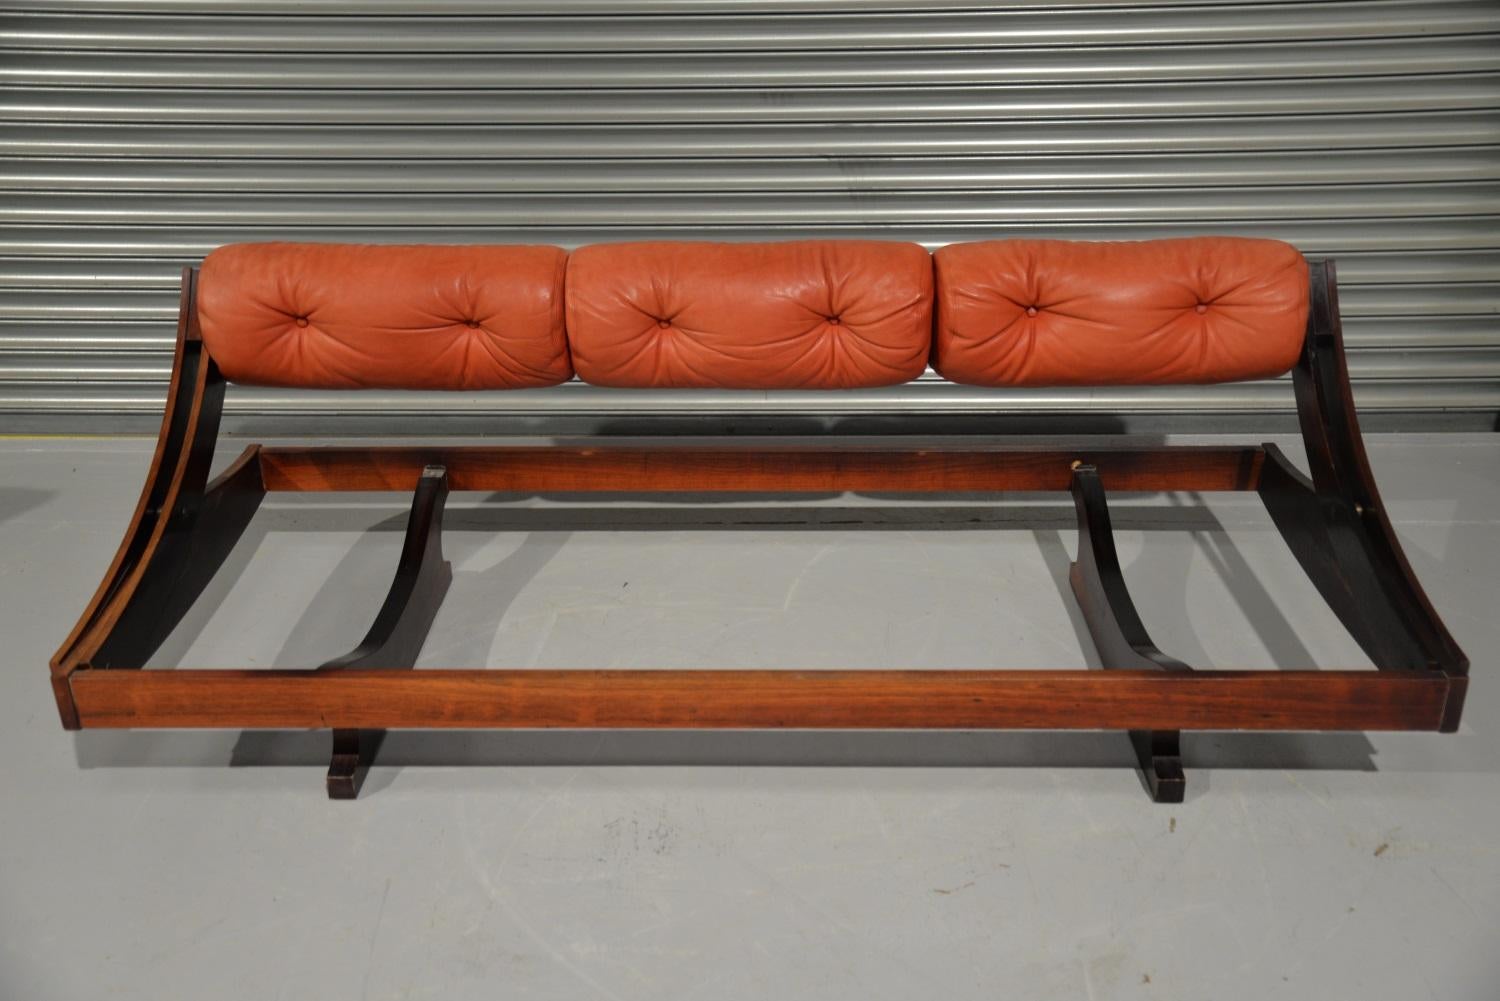 Gianni Songia Daybed/Sofa Designed for Sormani of Italy, 1963 For Sale 6